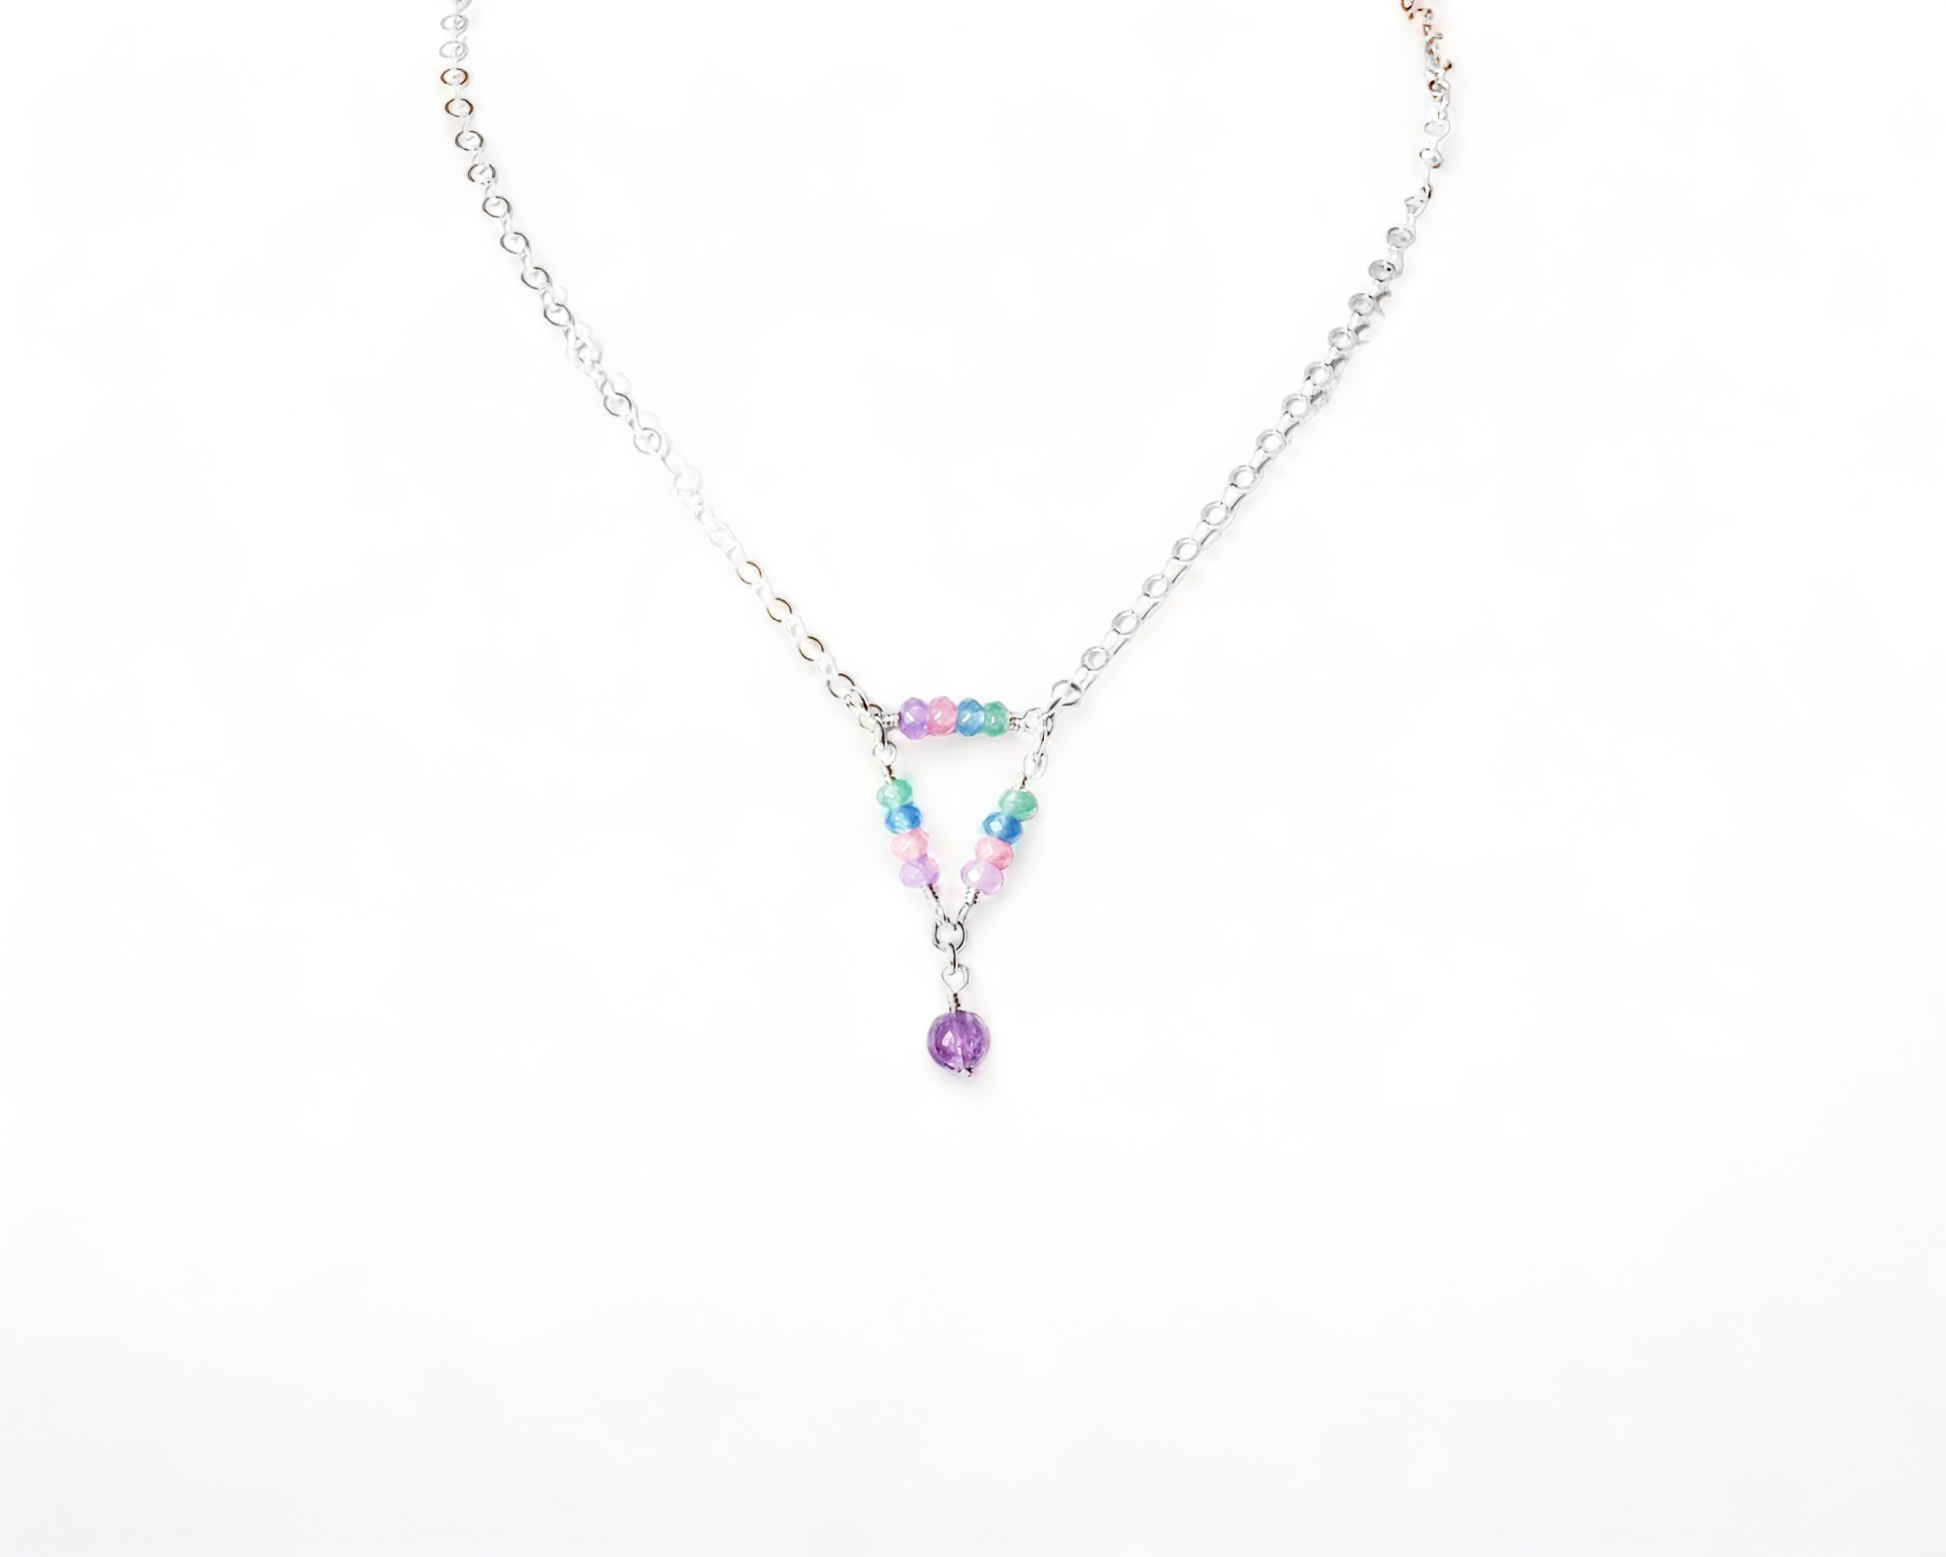 Today Tomorrow & Forever Amethyst Quartz Multicolour Necklace, Pink, Blue, Purple, Green, Triangle 